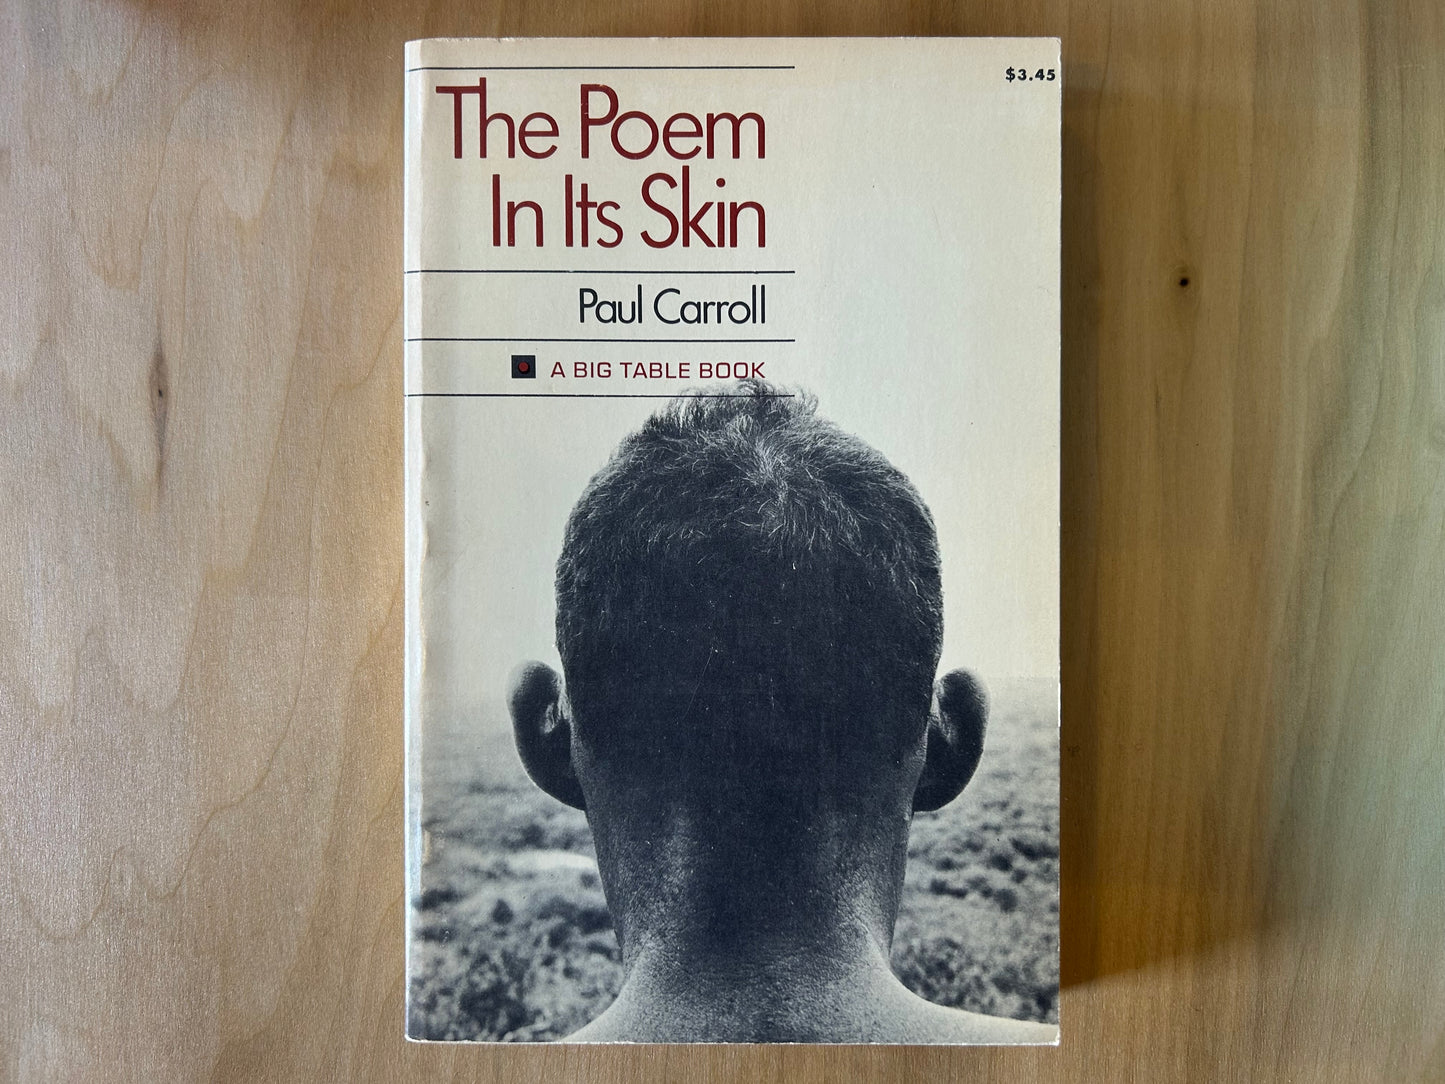 The Poem In Its Skin by Paul Carroll (A Big Table Book)